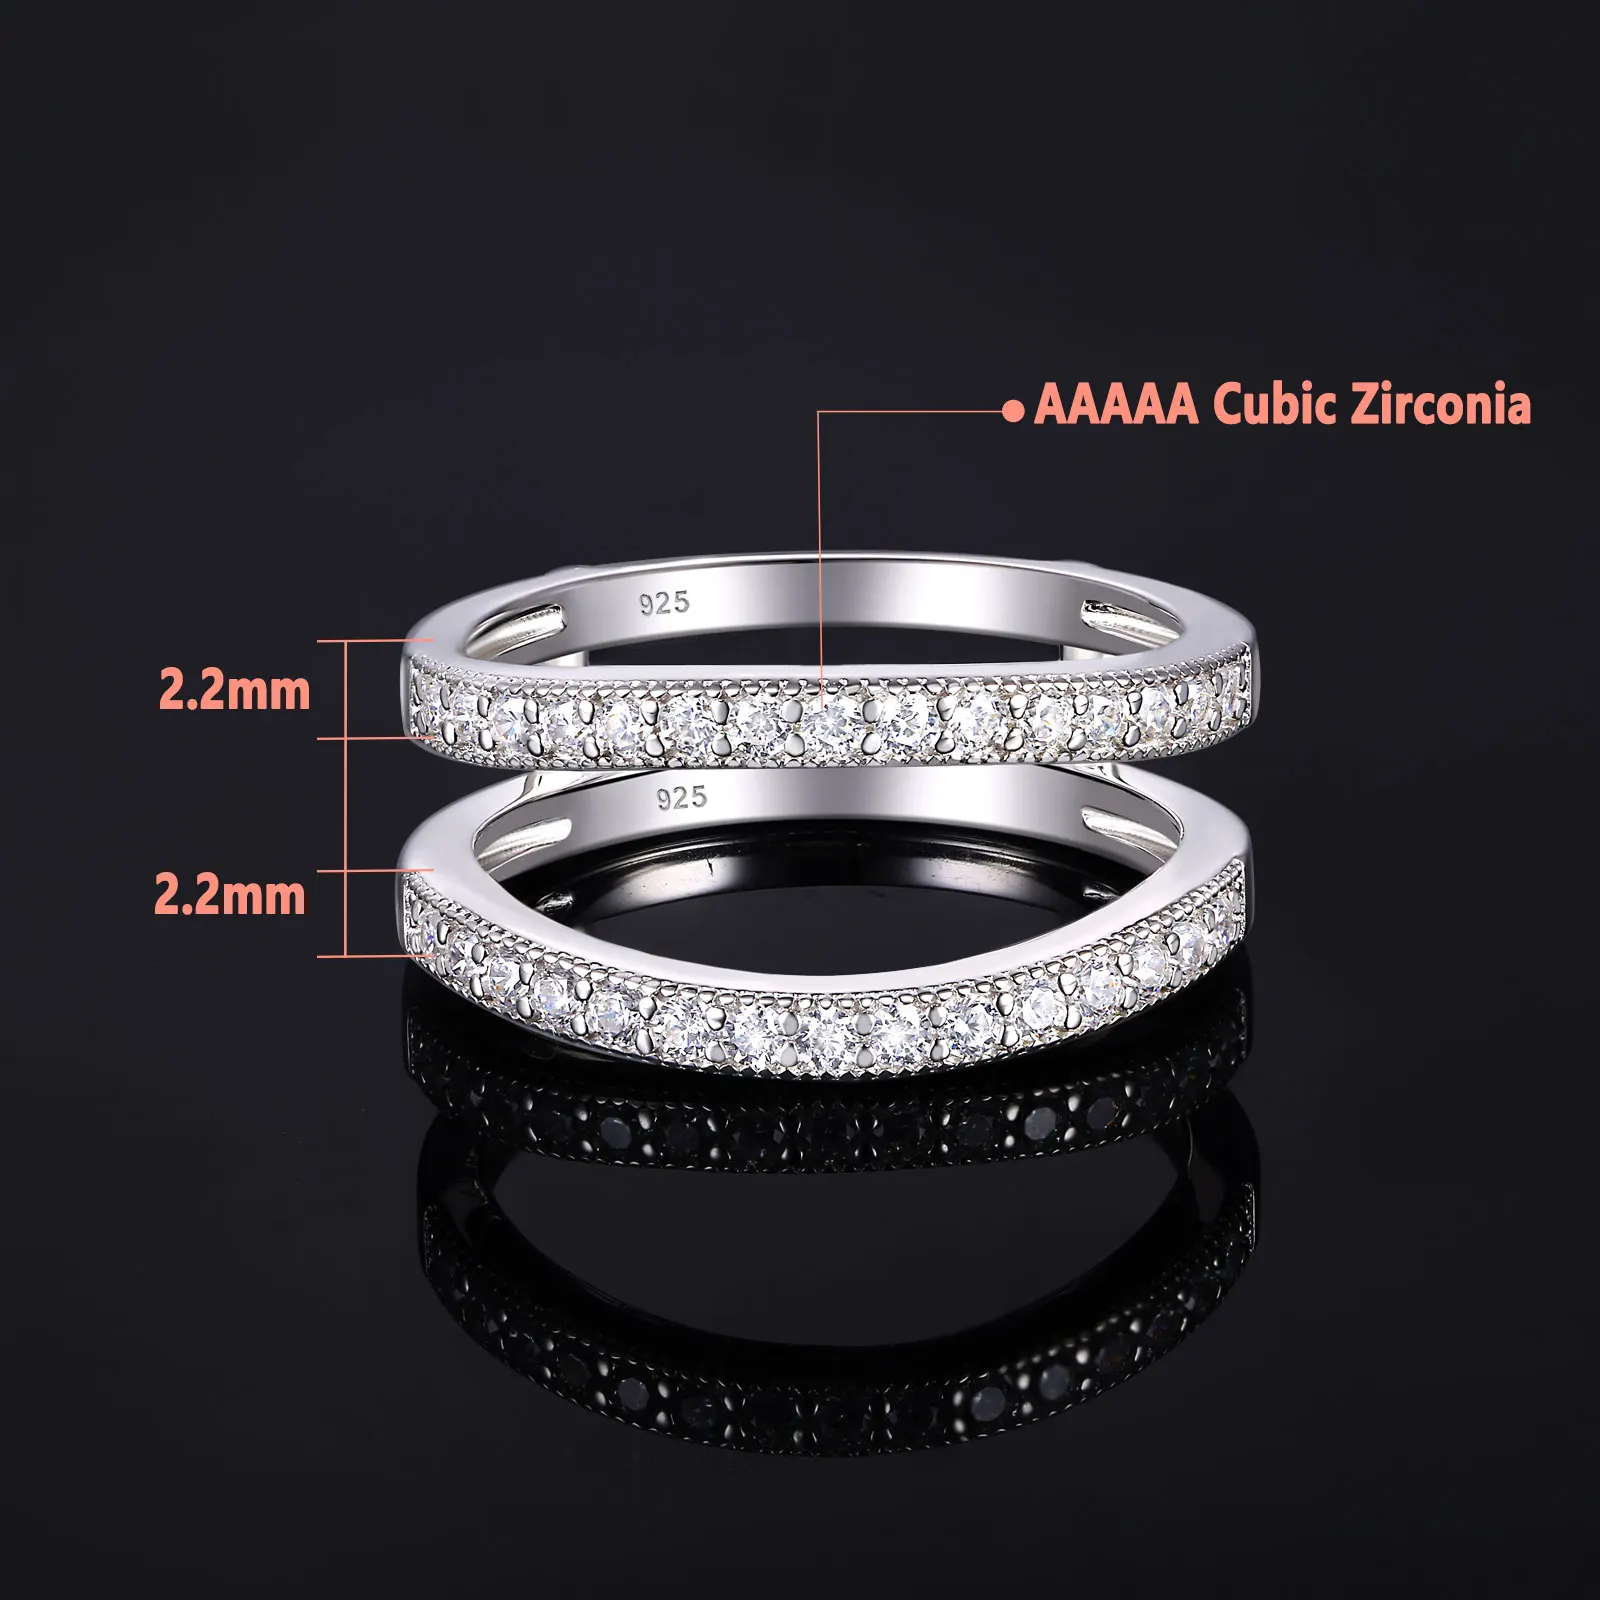 Newshe Cubic Zirconia Curved Wedding Bands for Women Ring Enhancer Guard for Engagement Rings 925 Sterling Silver Size 4-12 